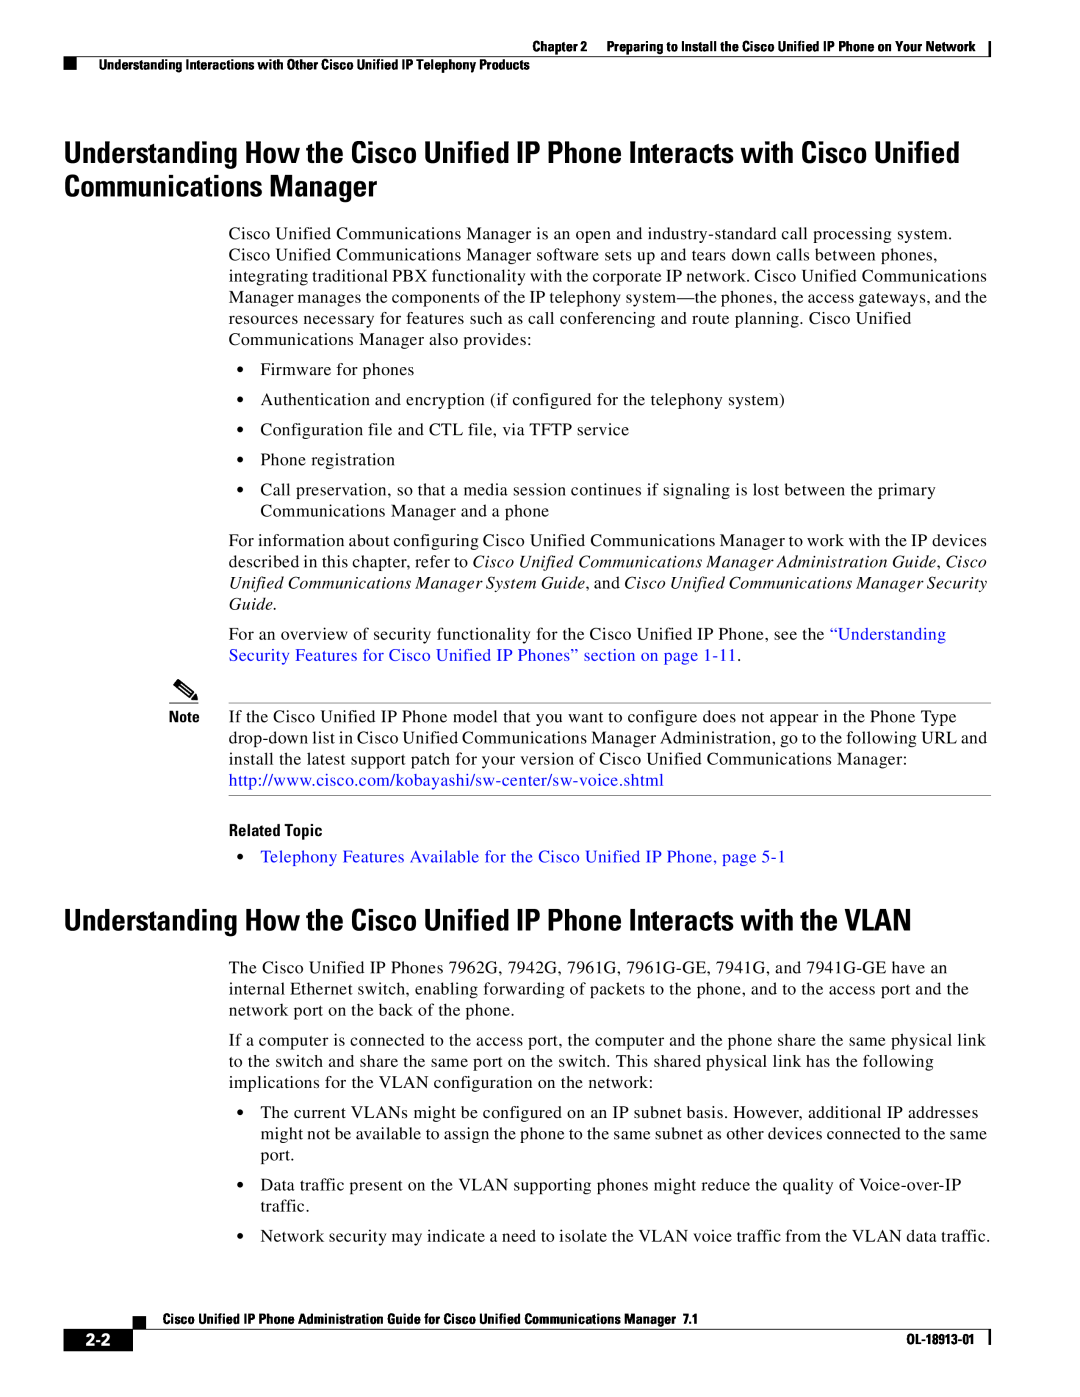 Cisco Systems 71 manual Related Topic, Telephony Features Available for the Cisco Unified IP Phone, page 